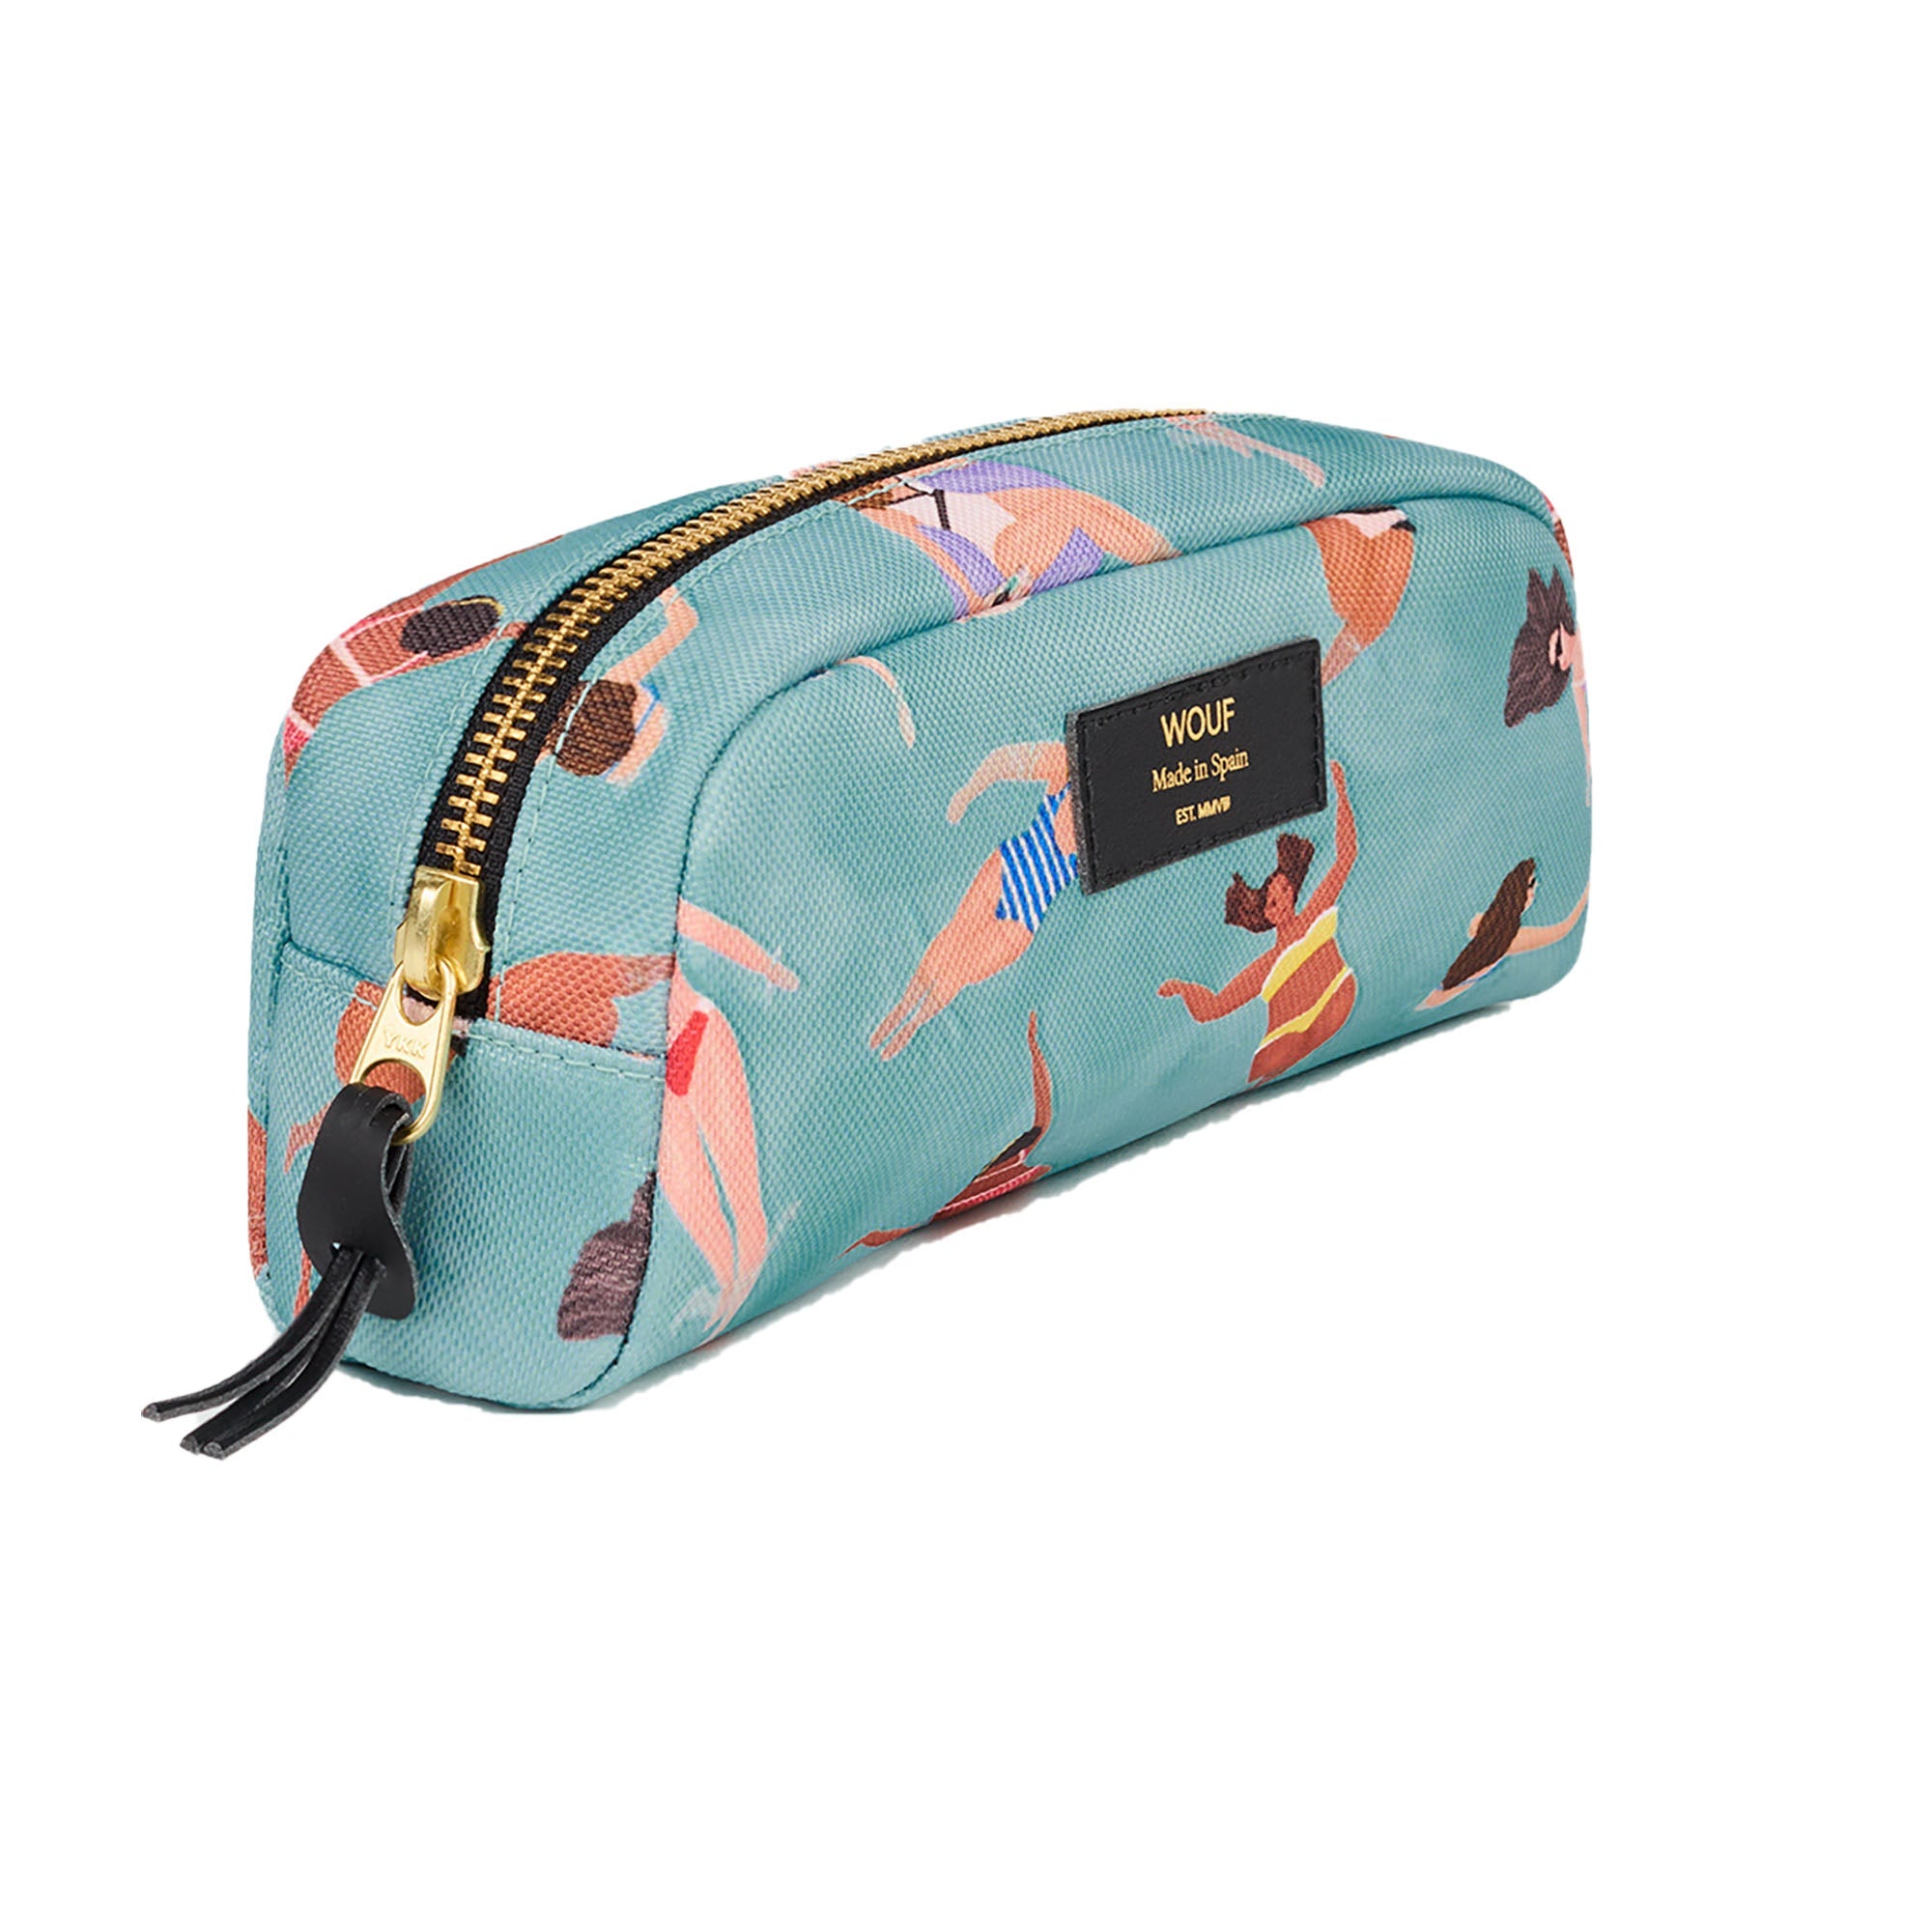 Petite trousse beauté Swimmers by WOUF